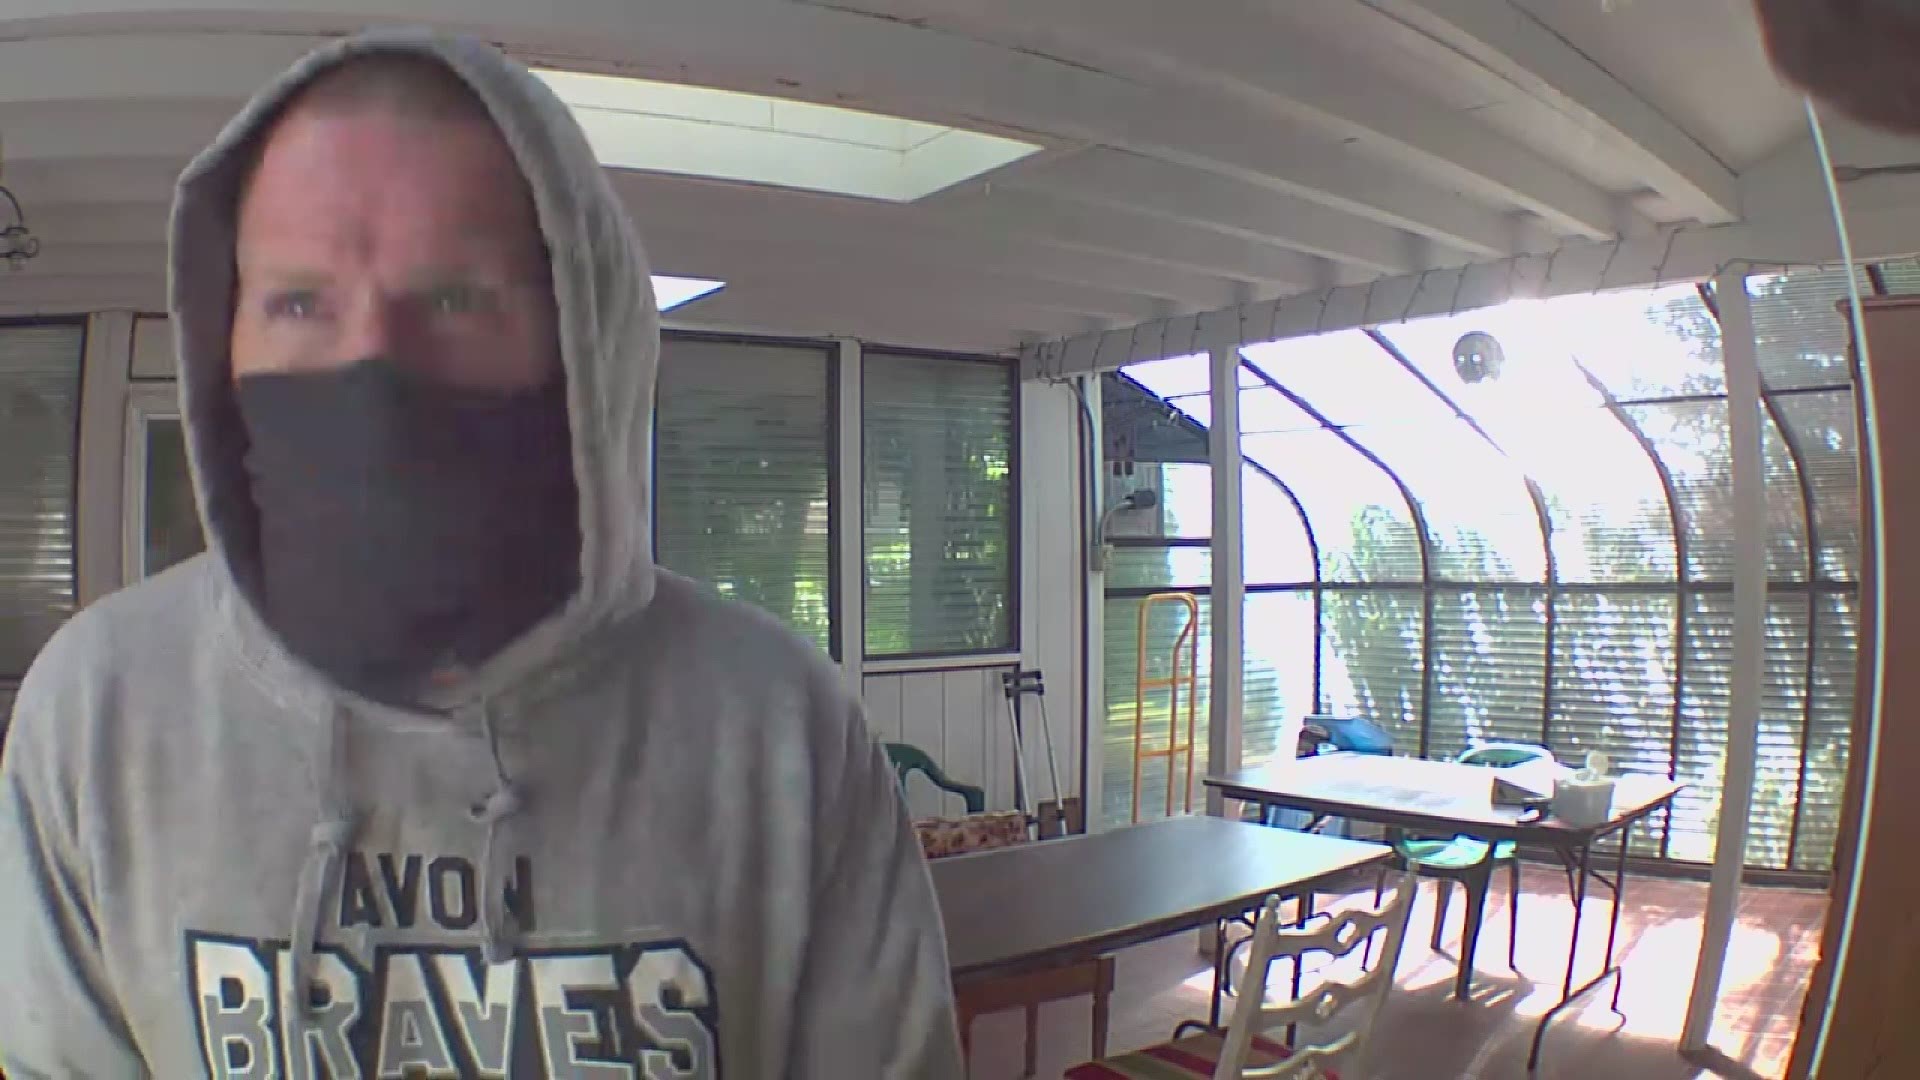 A suspect who broke into a Shoreline home removed a security camera, but the footage was stored on the cloud providing a clear image of the burglar's face.